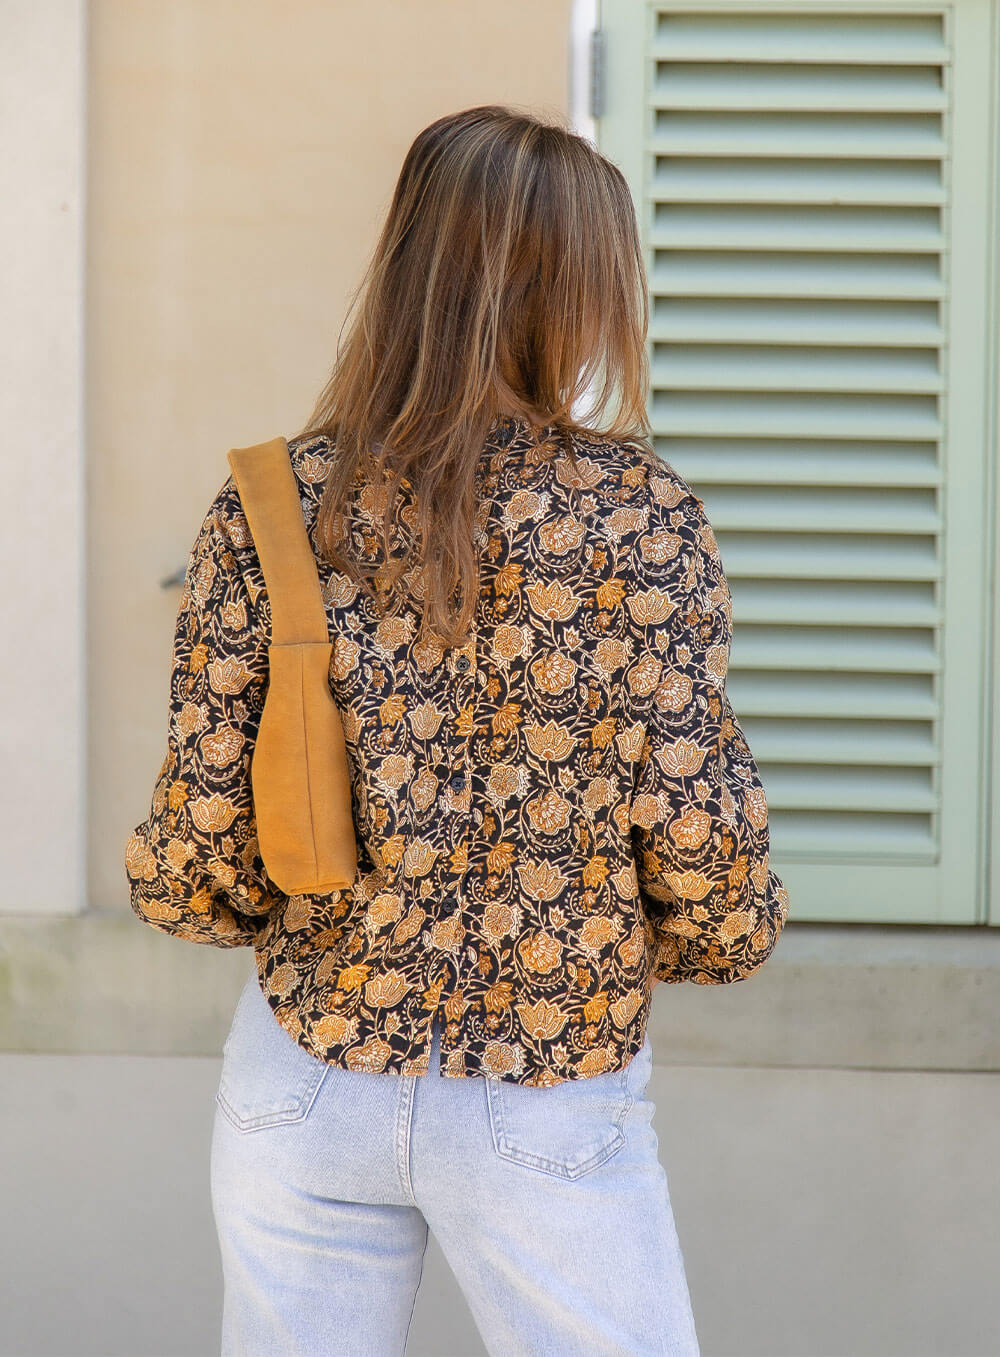 Tha Tiffany top in exclusive paisley black, tan, beige print features long sleeves with elasticised cuff, button through back yoke, shoulder detailing and breathable soft washed linen.